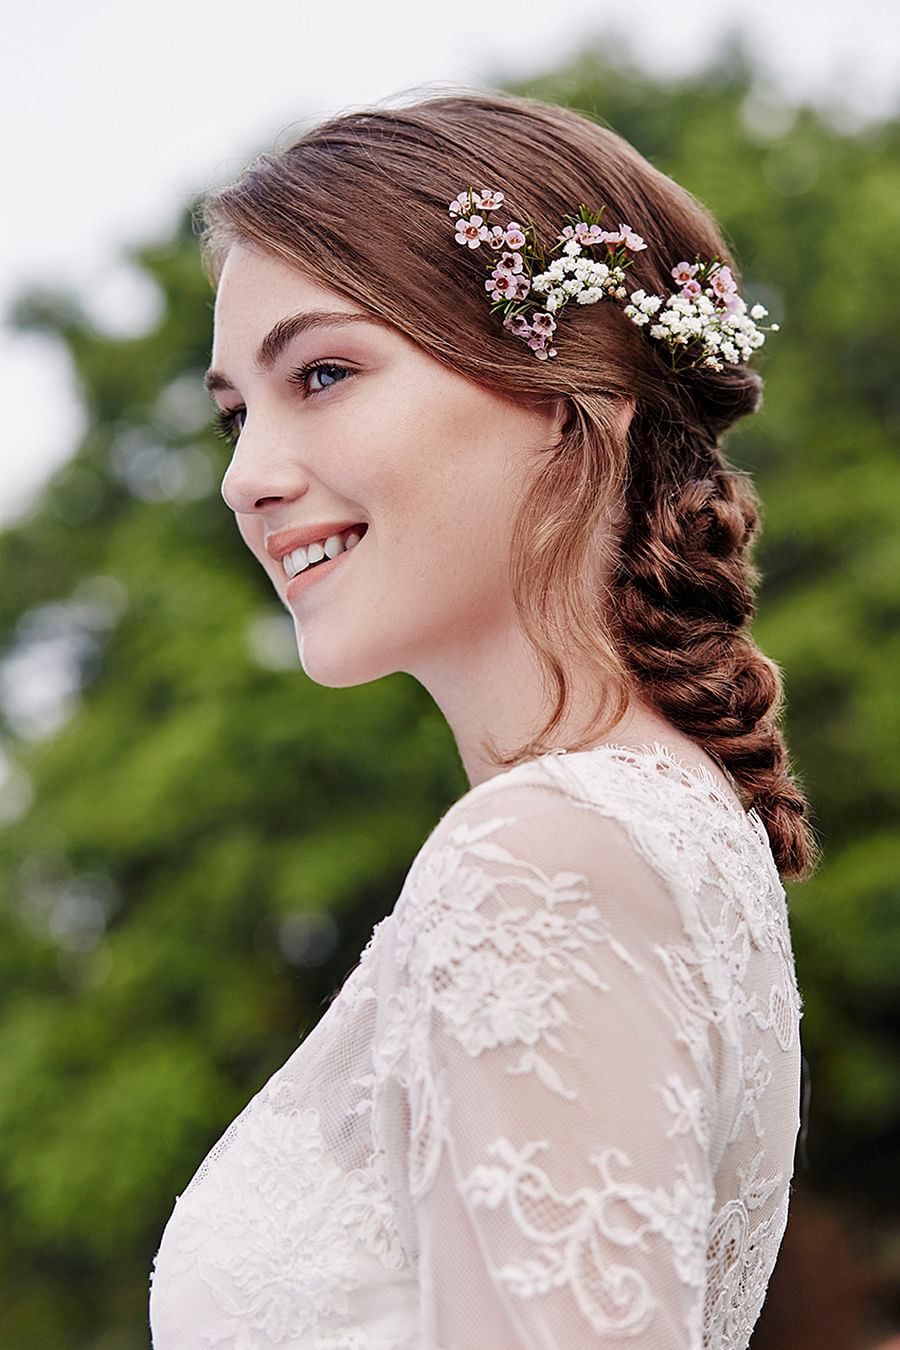 5 tips to choosing the right makeup artist for your wedding